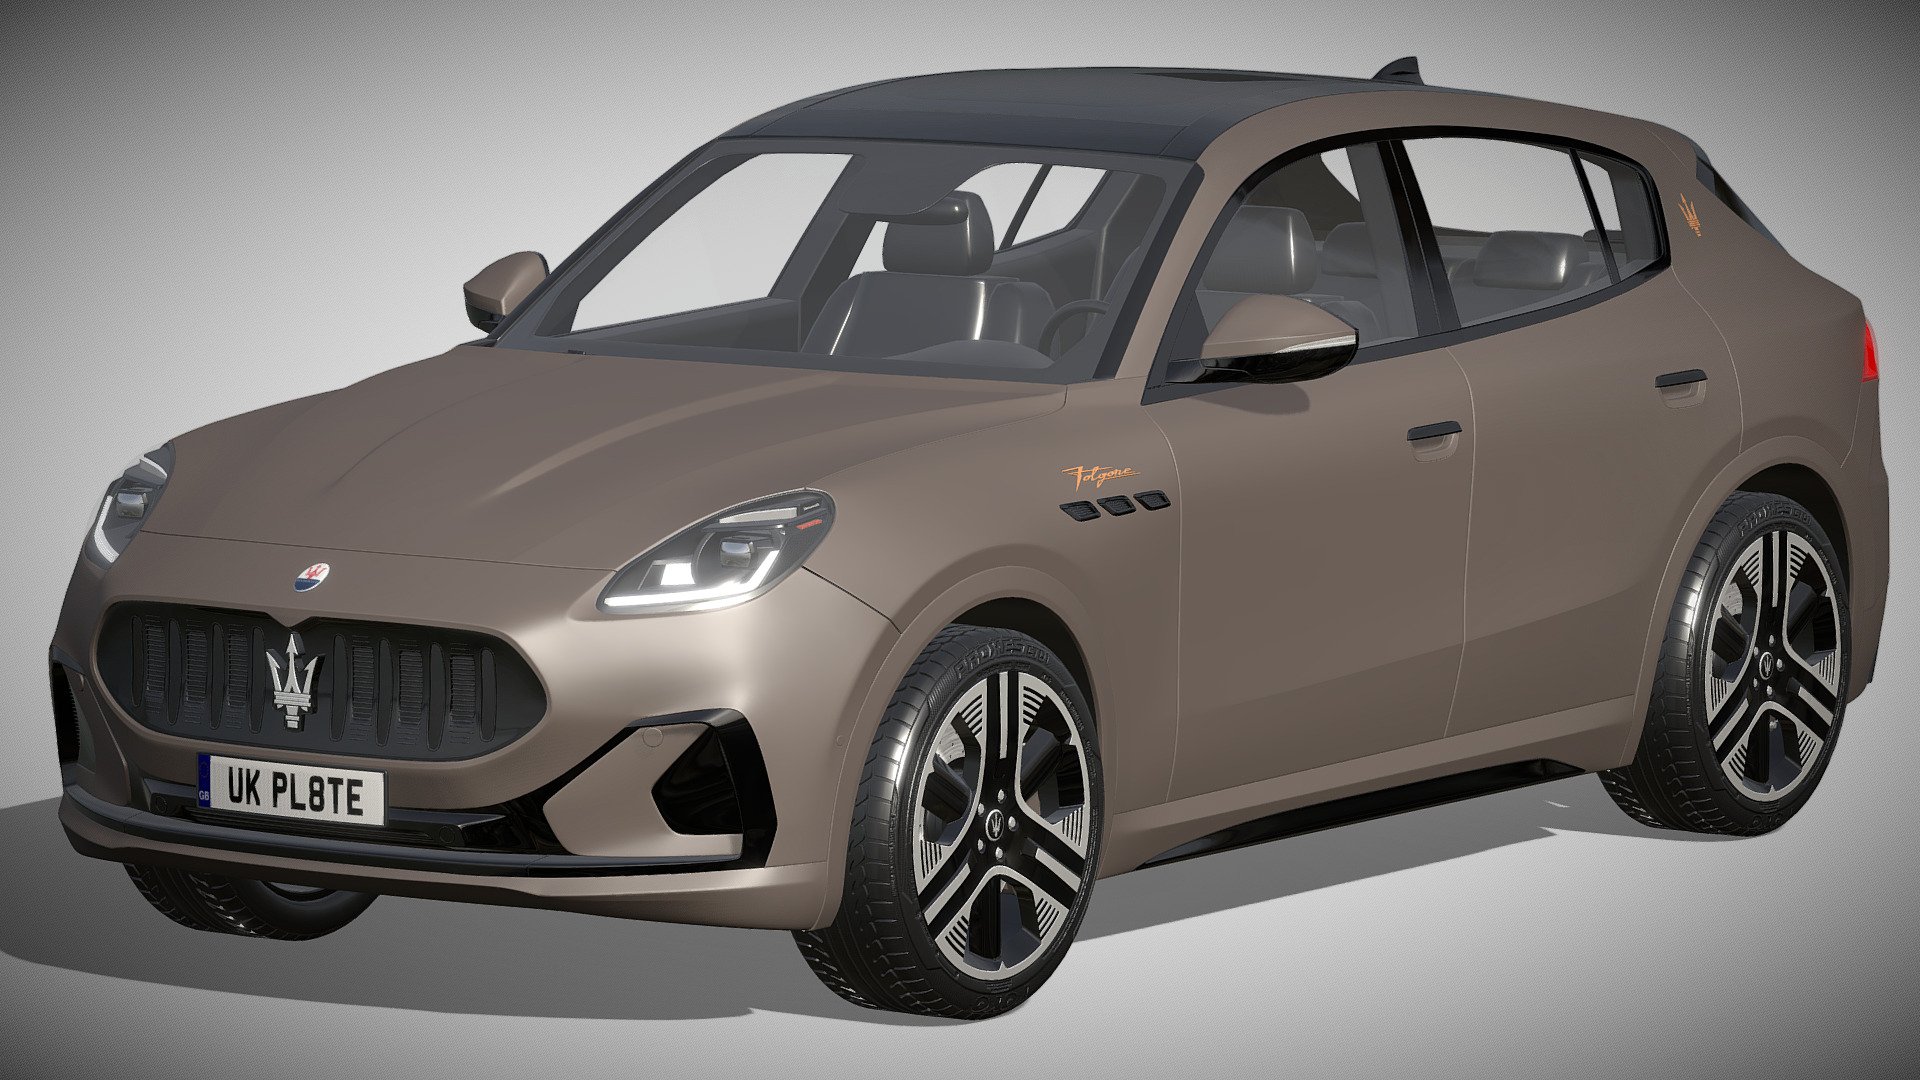 Maserati Grecale Folgore

https://www.maserati.com/global/en/shopping-tools/grecale-folgore

Clean geometry Light weight model, yet completely detailed for HI-Res renders. Use for movies, Advertisements or games

Corona render and materials

All textures include in *.rar files

Lighting setup is not included in the file! - Maserati Grecale Folgore - Buy Royalty Free 3D model by zifir3d 3d model